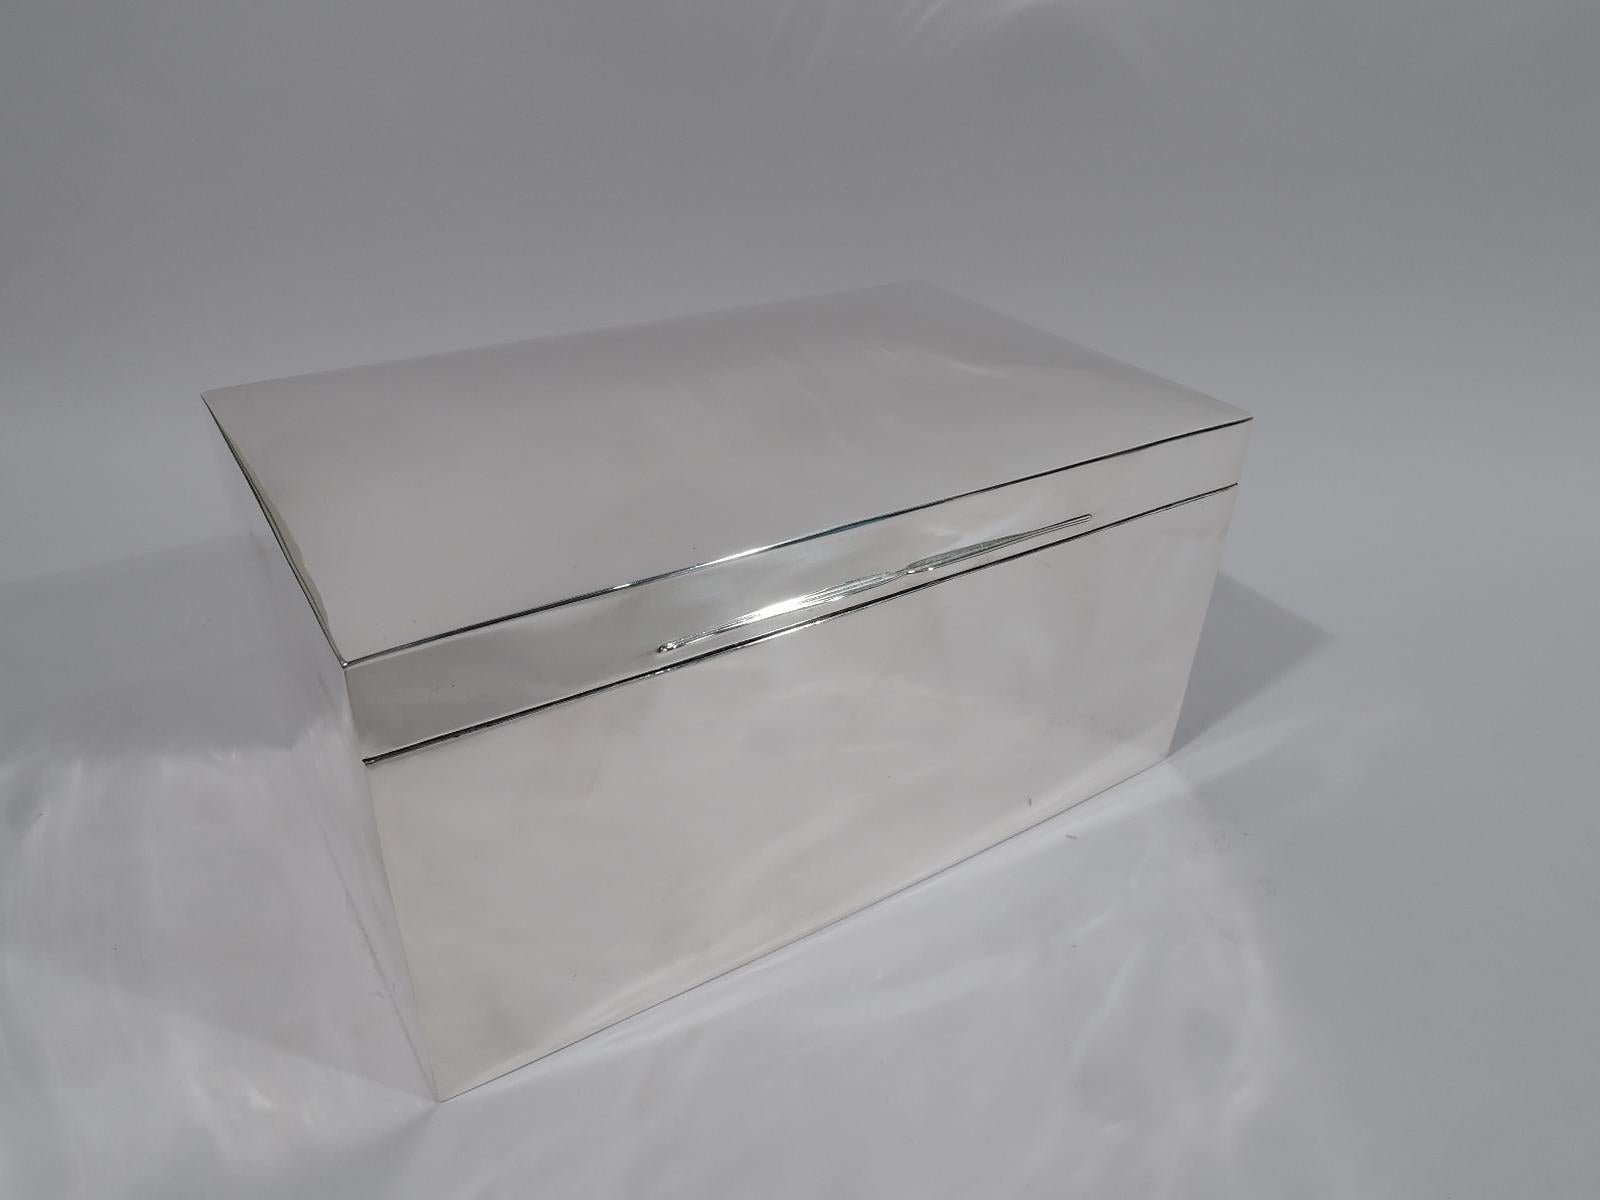 Large Victorian sterling silver box. Made by Mappin & Webb in London in 1899. Rectangular with straight sides, Cover hinged and gently curved with double tapering tabs. Box and cover interior cedar lined with detachable partitions. Box underside